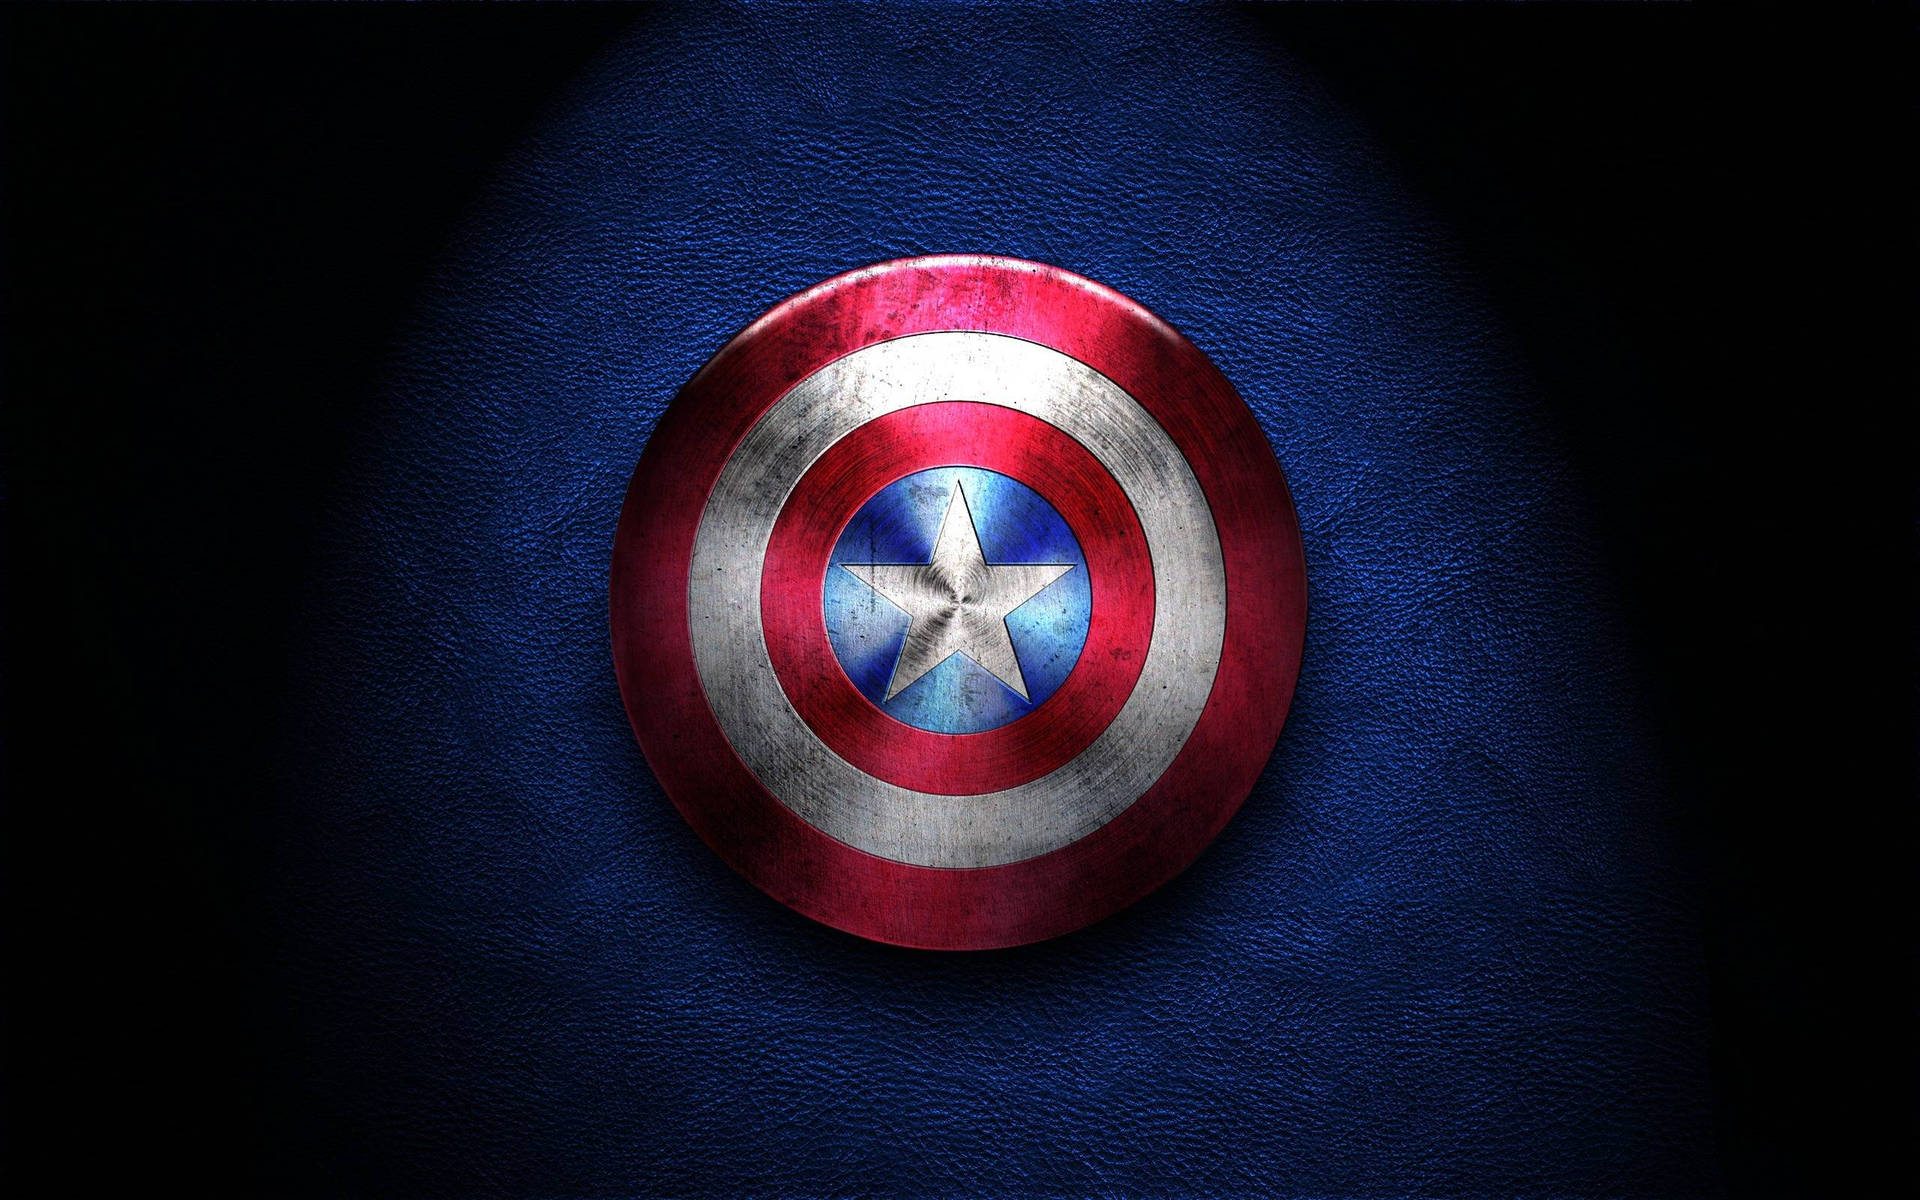 "Captain America protecting humanity with his shield!" Wallpaper